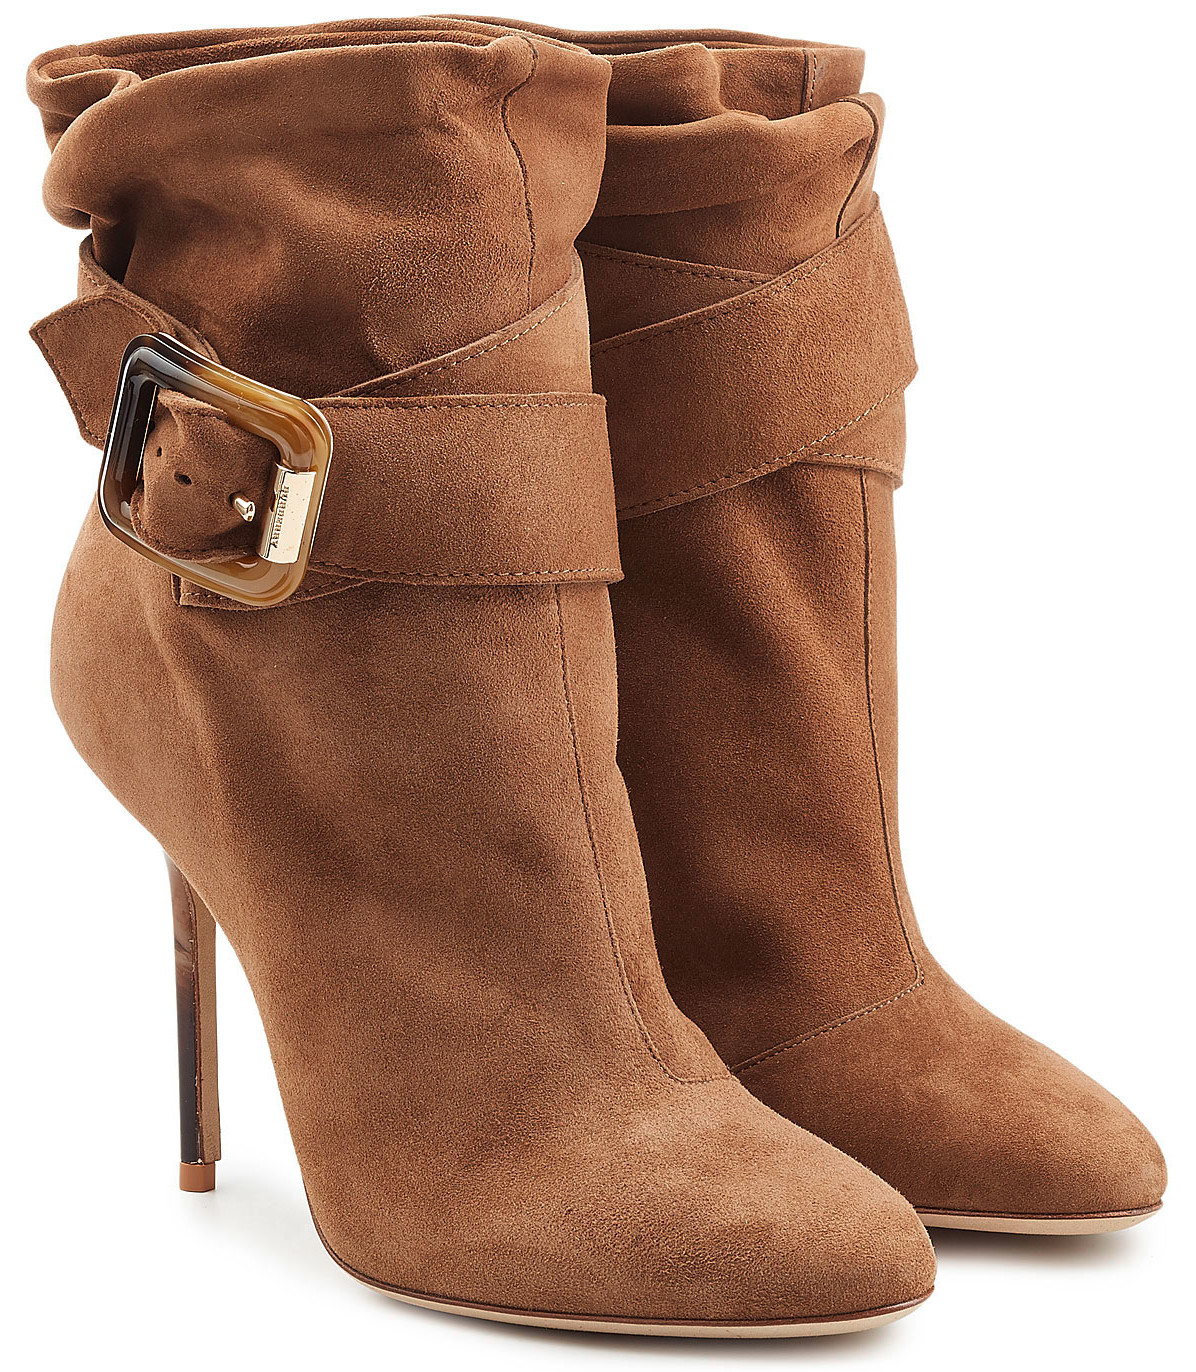 Burberry brown suede ankle boots